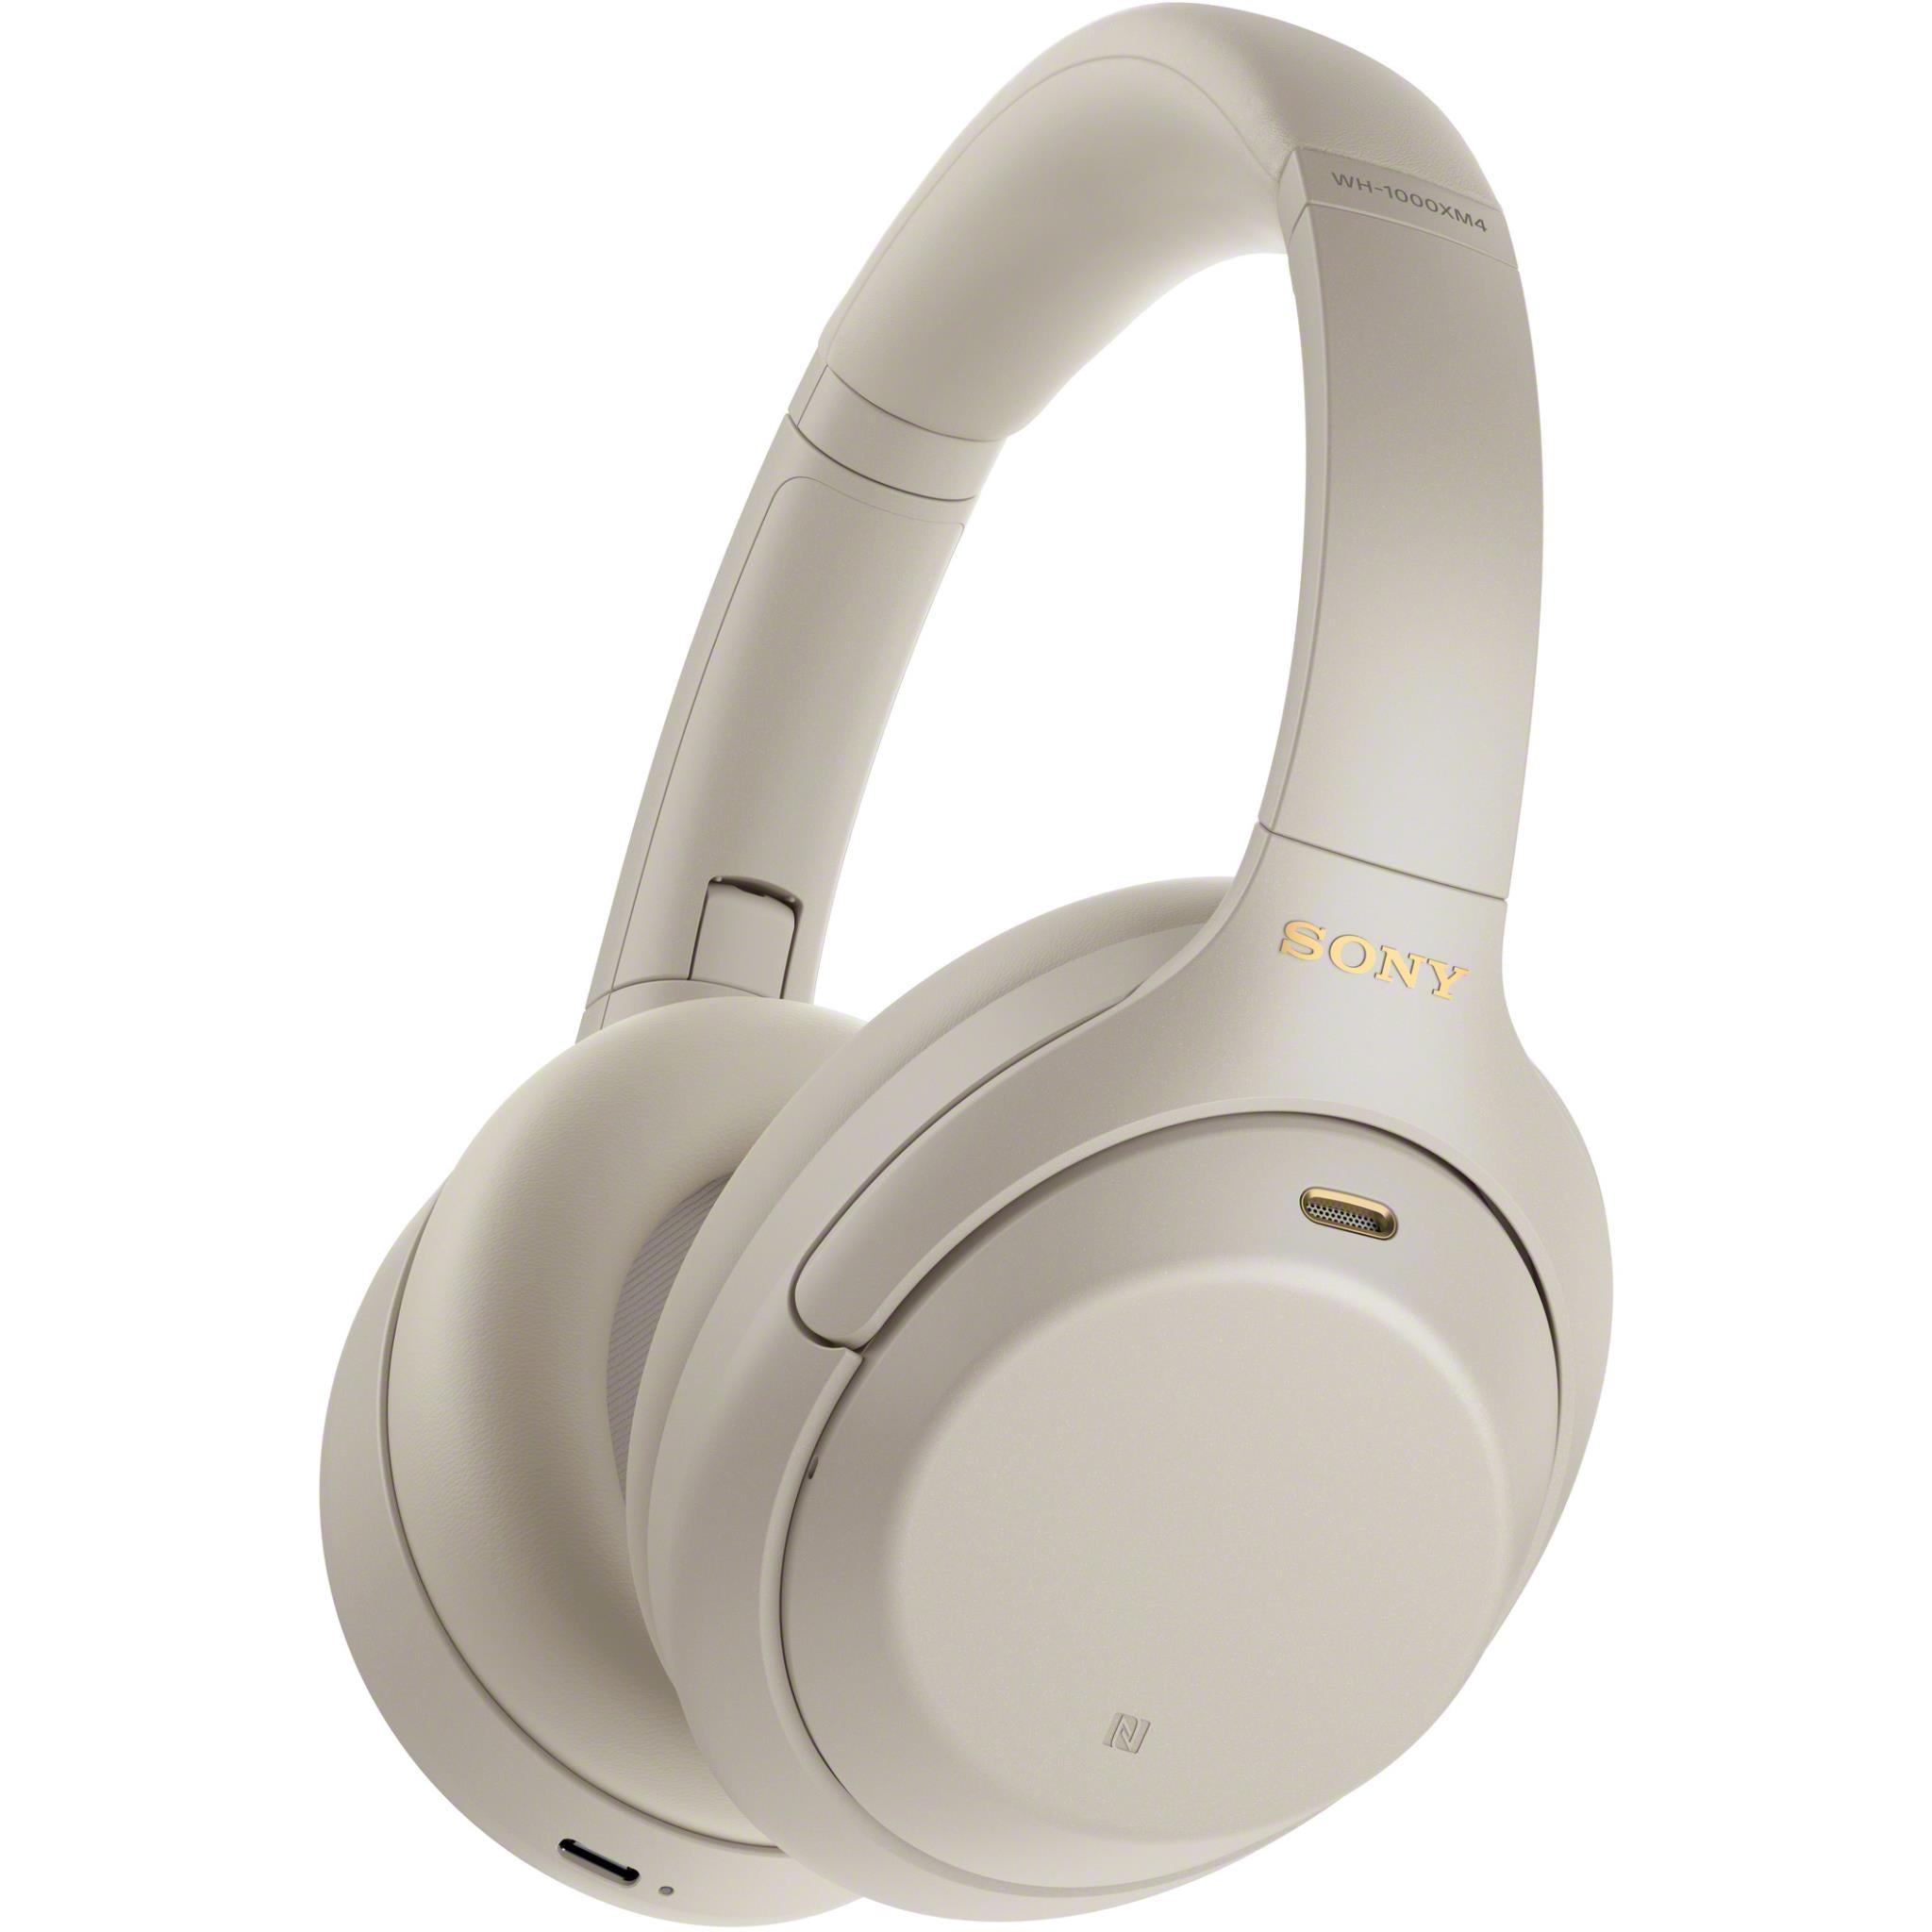 Sony WH-1000XM4 Wireless Noise Cancelling Over-Ear Headphones